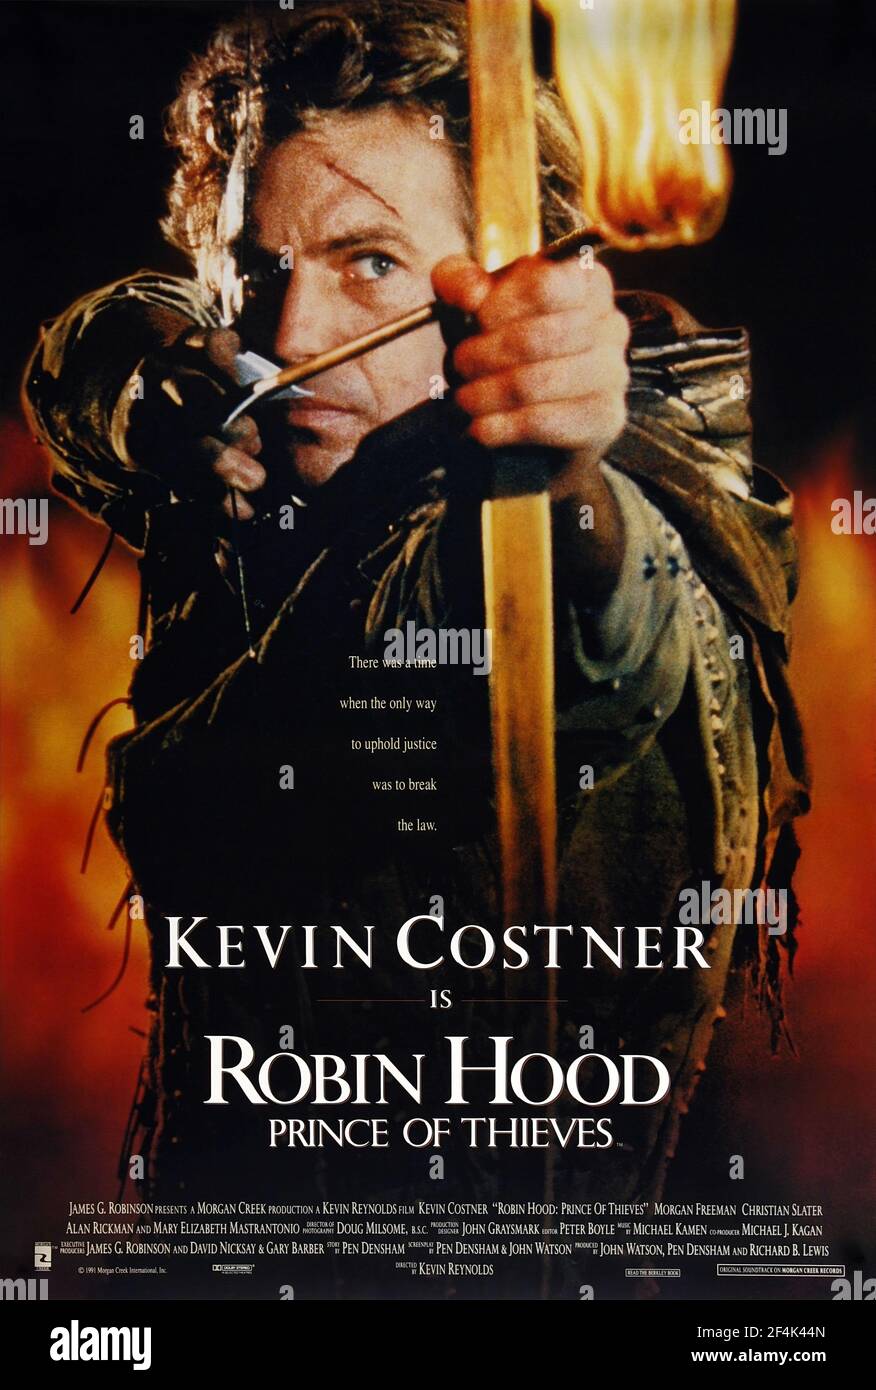 KEVIN COSTNER in ROBIN HOOD: PRINCE OF THIEVES (1991), directed by KEVIN REYNOLDS. Copyright: Editorial use only. No merchandising or book covers. This is a publicly distributed handout. Access rights only, no license of copyright provided. Only to be reproduced in conjunction with promotion of this film. Credit: WARNER BROTHERS / Album Stock Photo